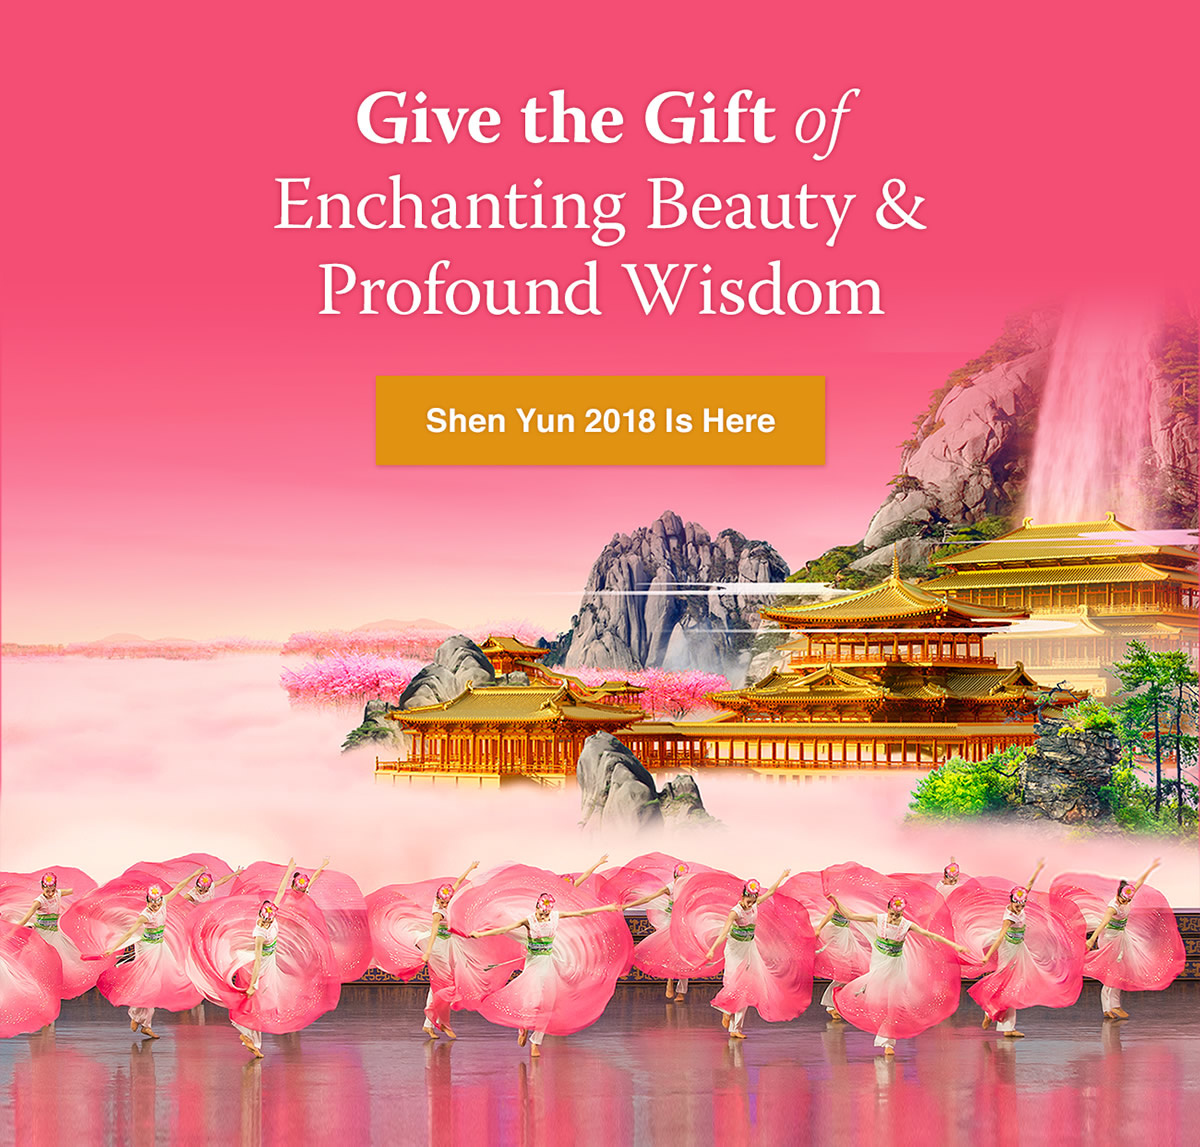 Give the Gift of Enchanting Beauty & Profound Wisdom